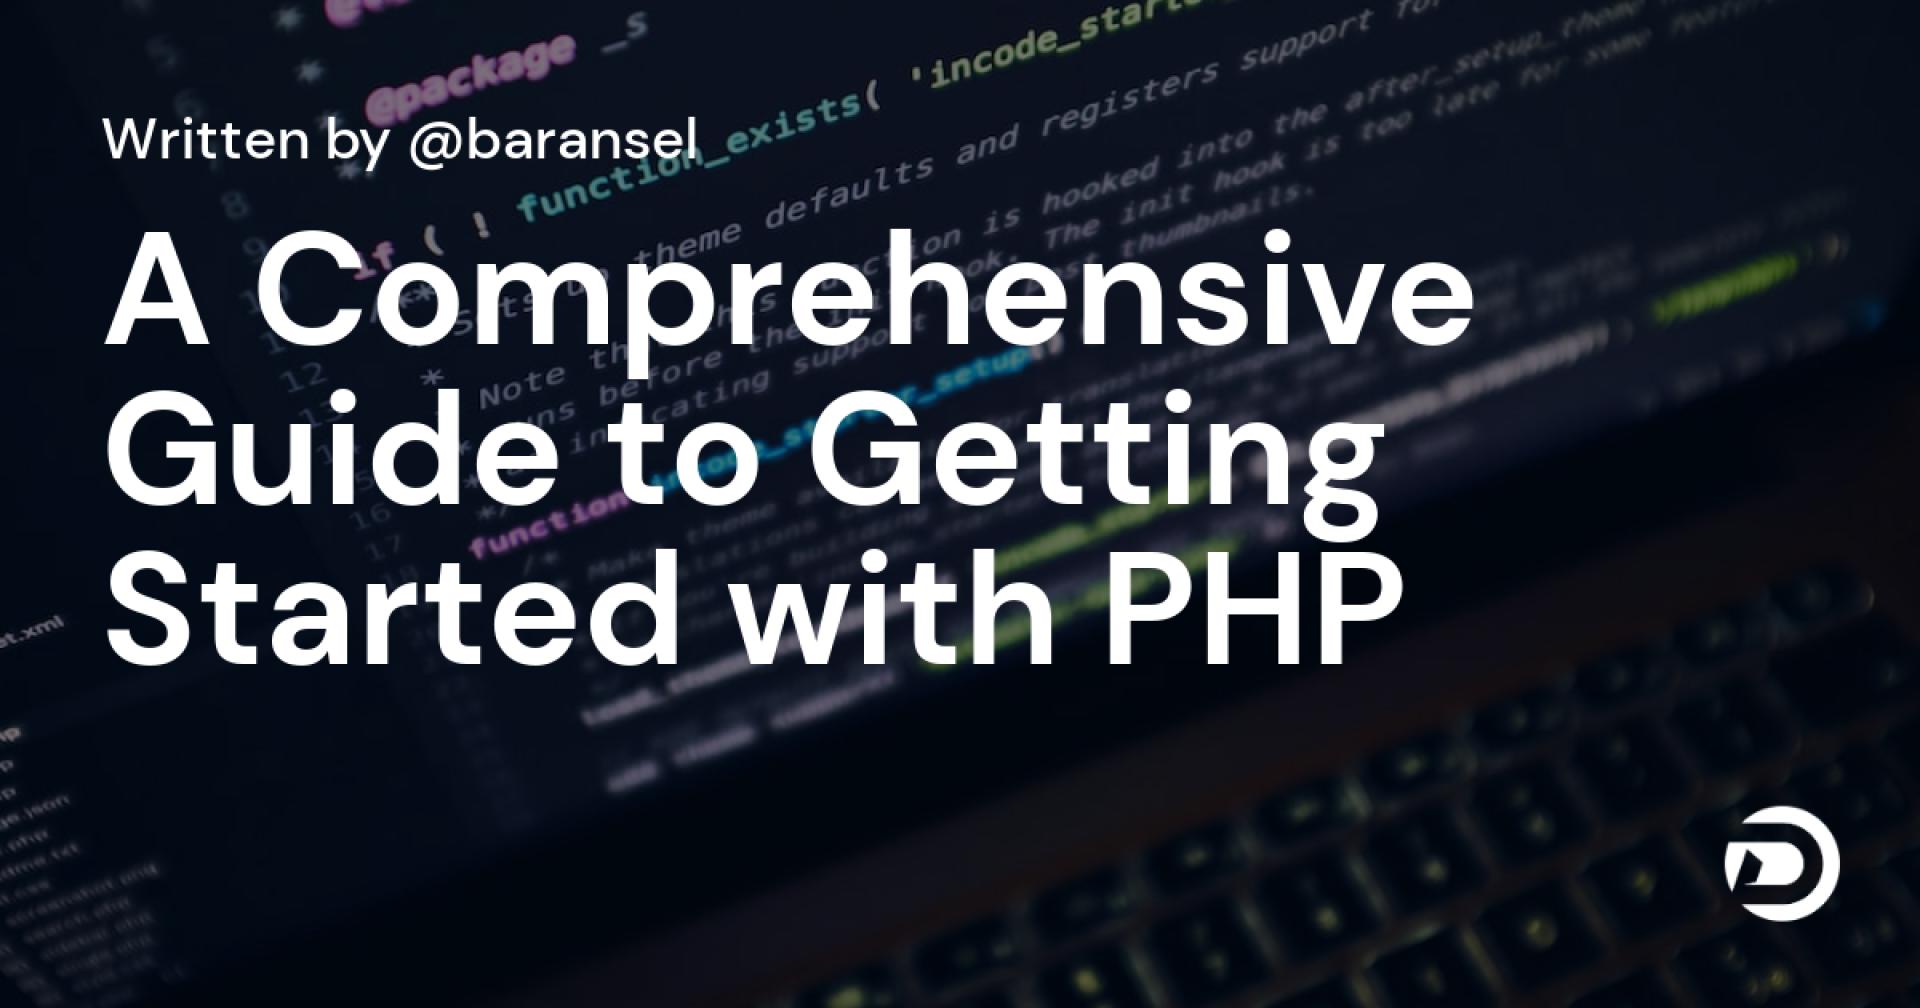 A Comprehensive Guide to Getting Started with PHP: Tips, Tricks, and Code Examples